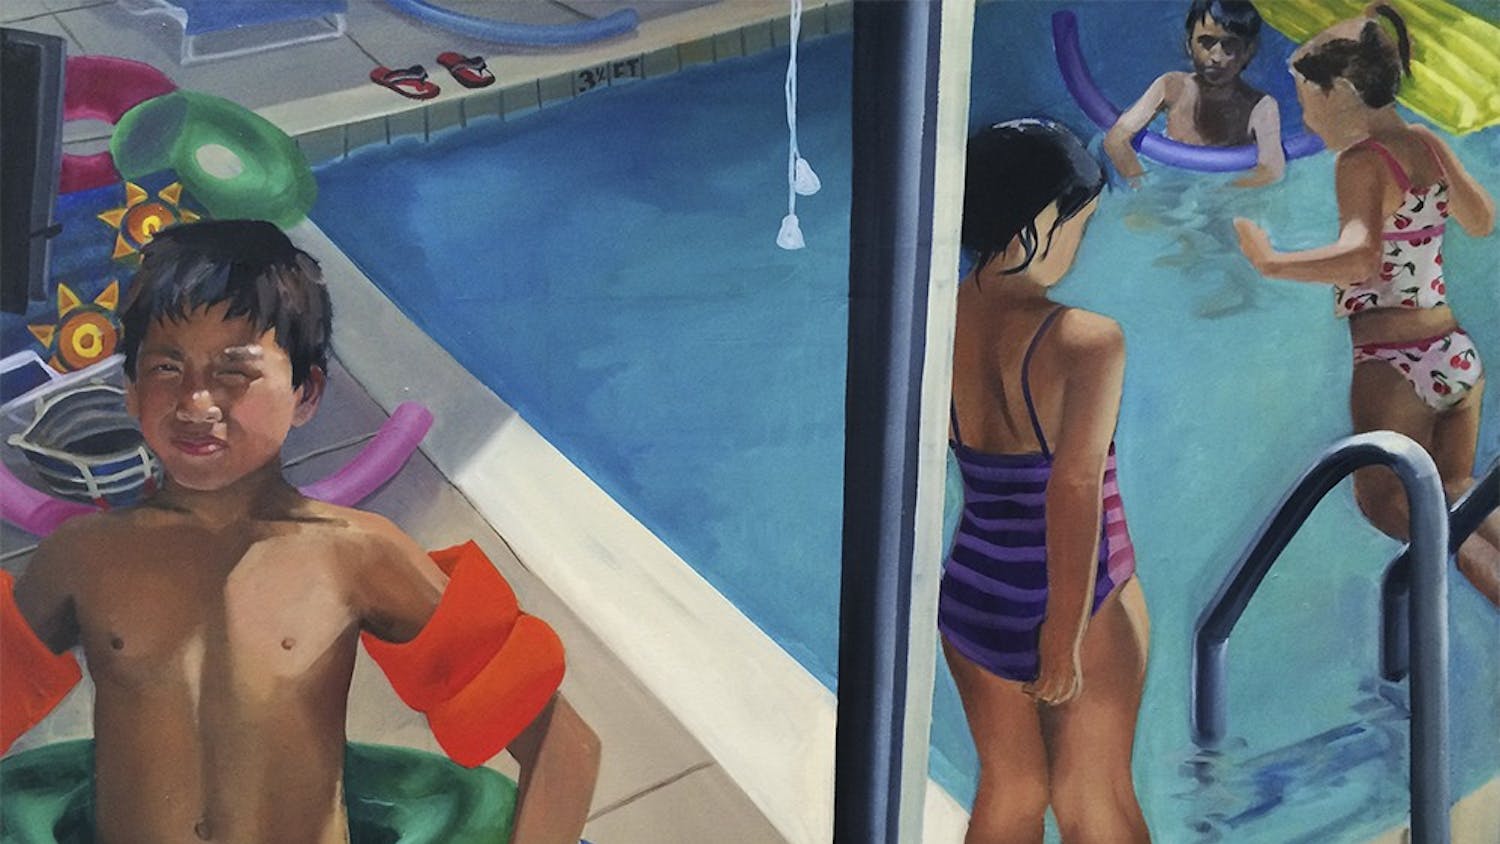 Above is a painting by Gretchen Chua titled "Pool Party," painted for her B.F.A. Thesis Exhibition last December.